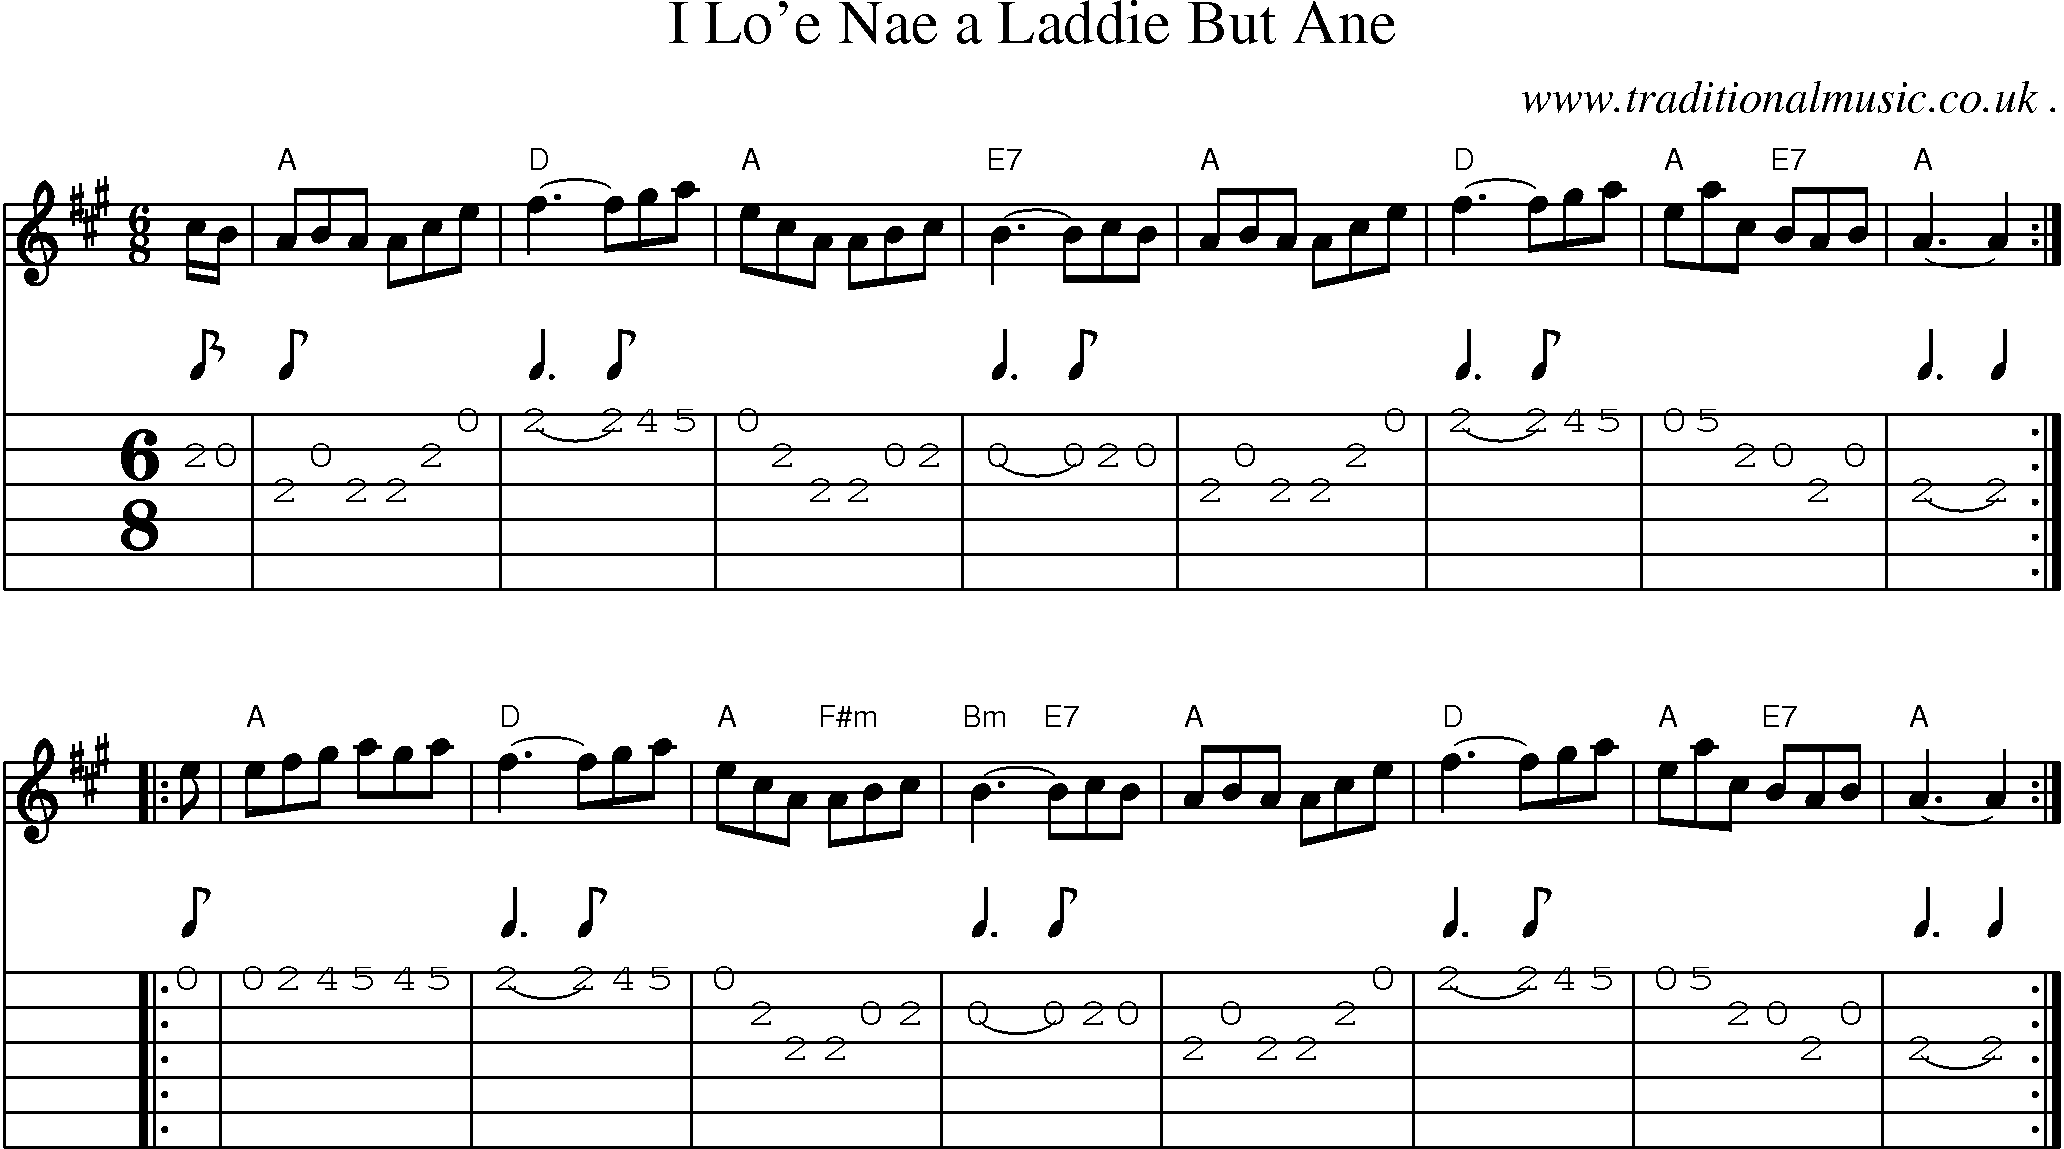 Sheet-music  score, Chords and Guitar Tabs for I Loe Nae A Laddie But Ane